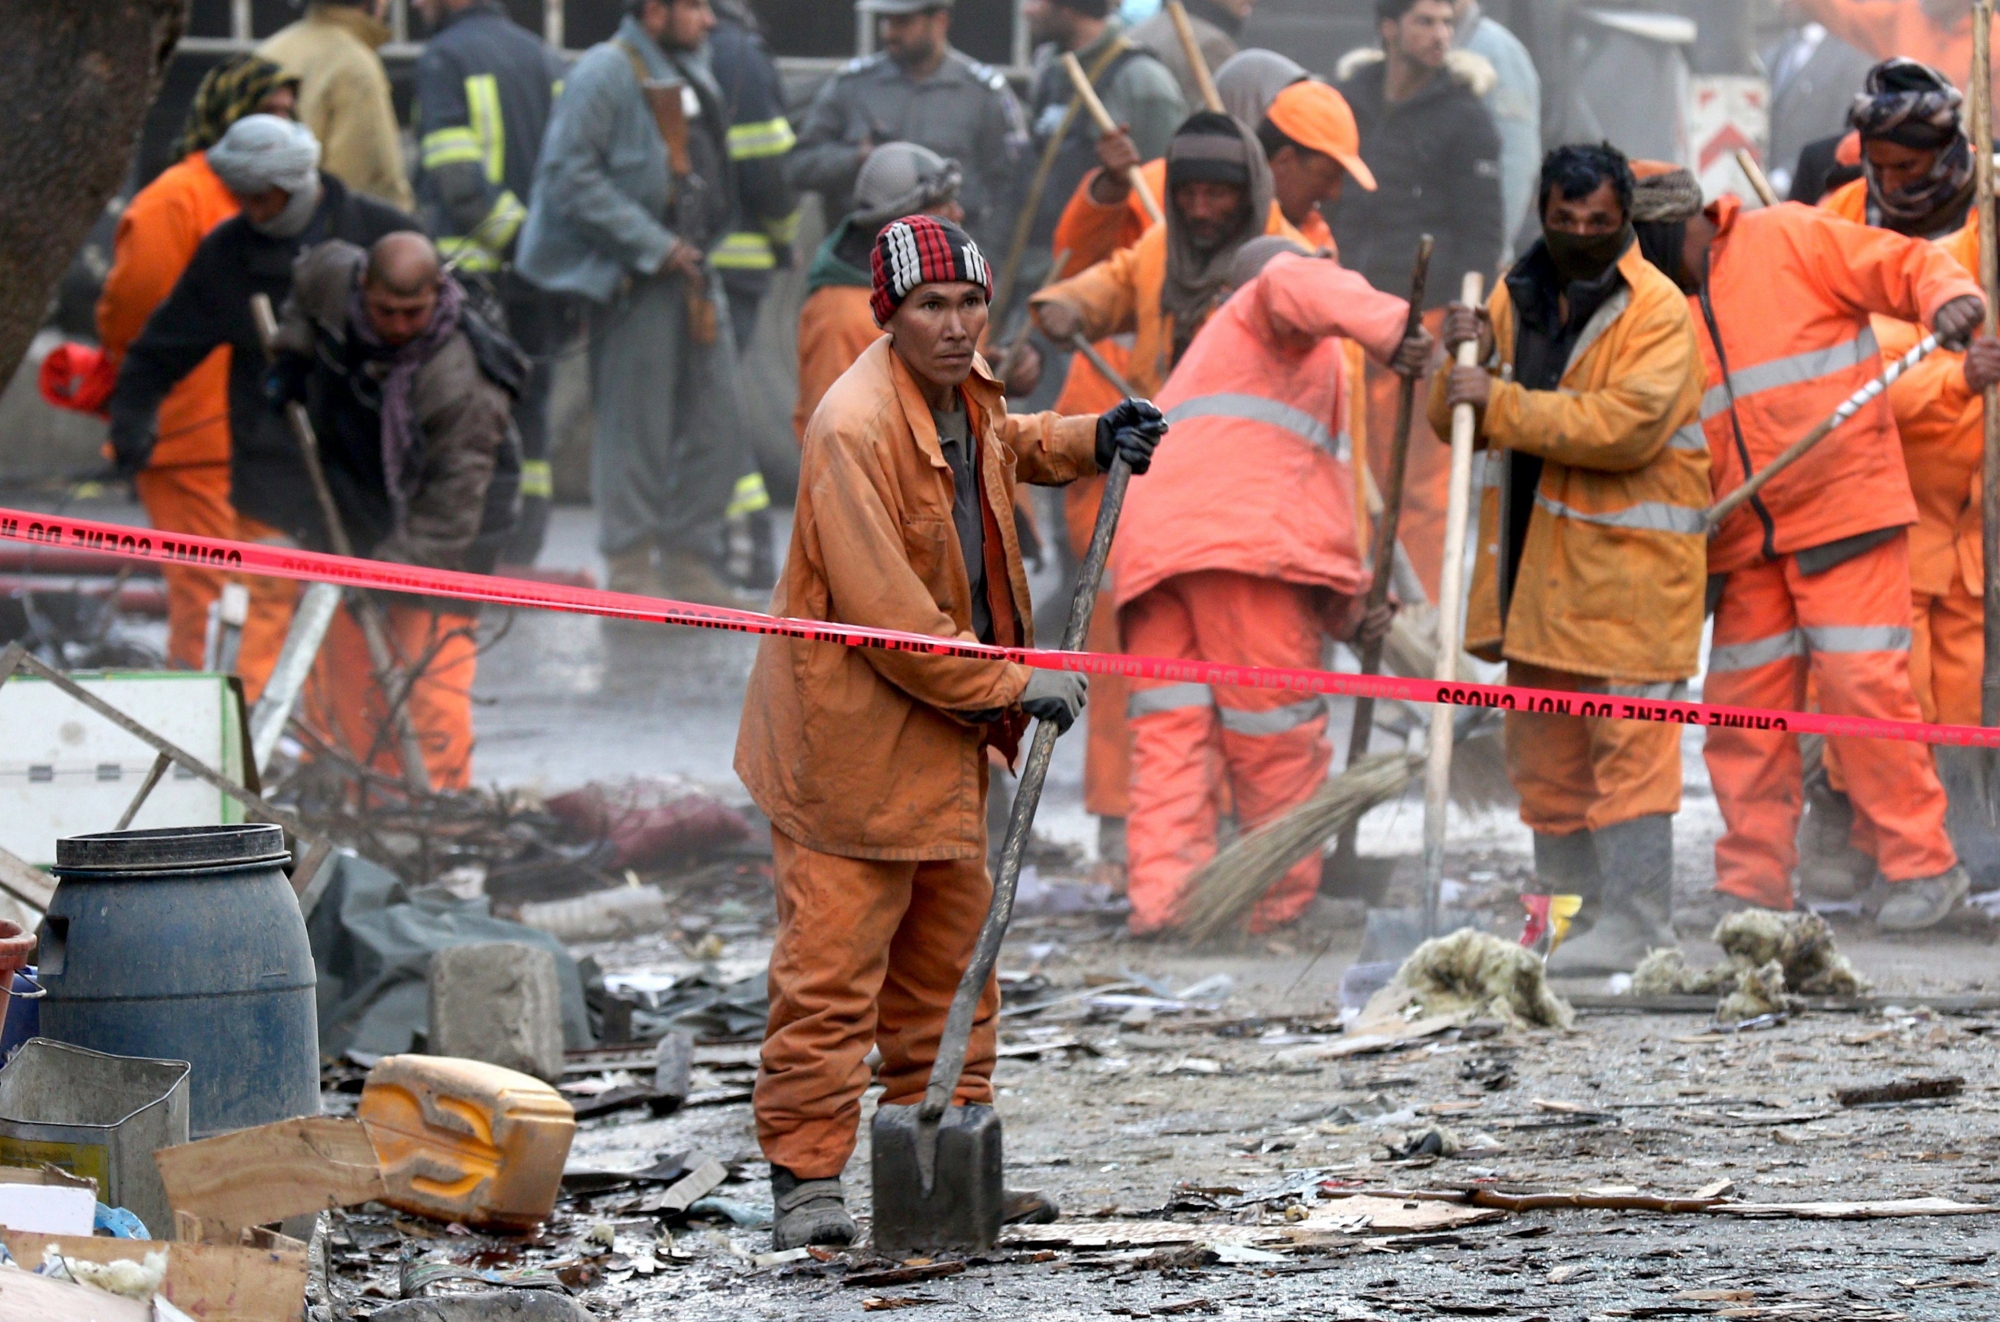 epa06479065 Afghan muncipality workers at the scene of a suicide bomb attack in Kabul, Afghanistan, 27 January 2018. Death toll climbed to 95 while 158 were injured in the massive Taliban car-bomb attack in Sadarat Square, downtown Kabul, according to Afghan Ministry of Health. The Taliban resorted to an ambulance loaded with explosives to carry out the attack in a busy commercial area near the former Interior Ministry building and a facility of the National Directorate of Security (NDS).  EPA/HEDAYATULLAH AMID AFGHANISTAN BOMB EXPLOSION